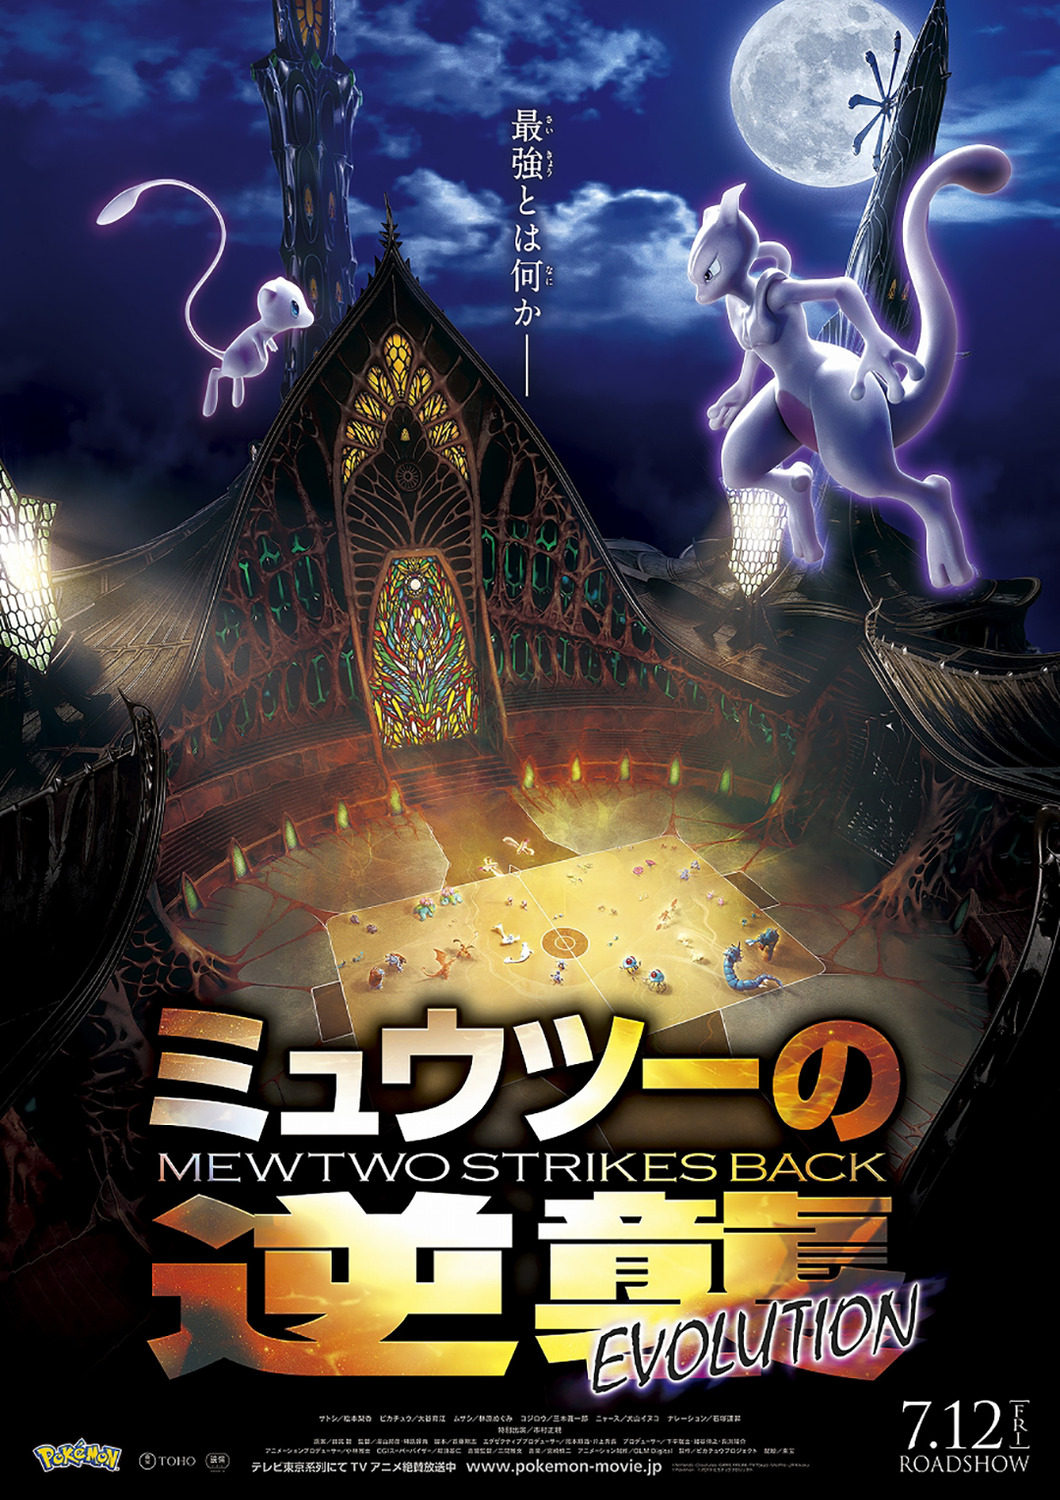 Extra Large Movie Poster Image for Pokemon the Movie: Mewtwo Strikes Back Evolution (#2 of 2)